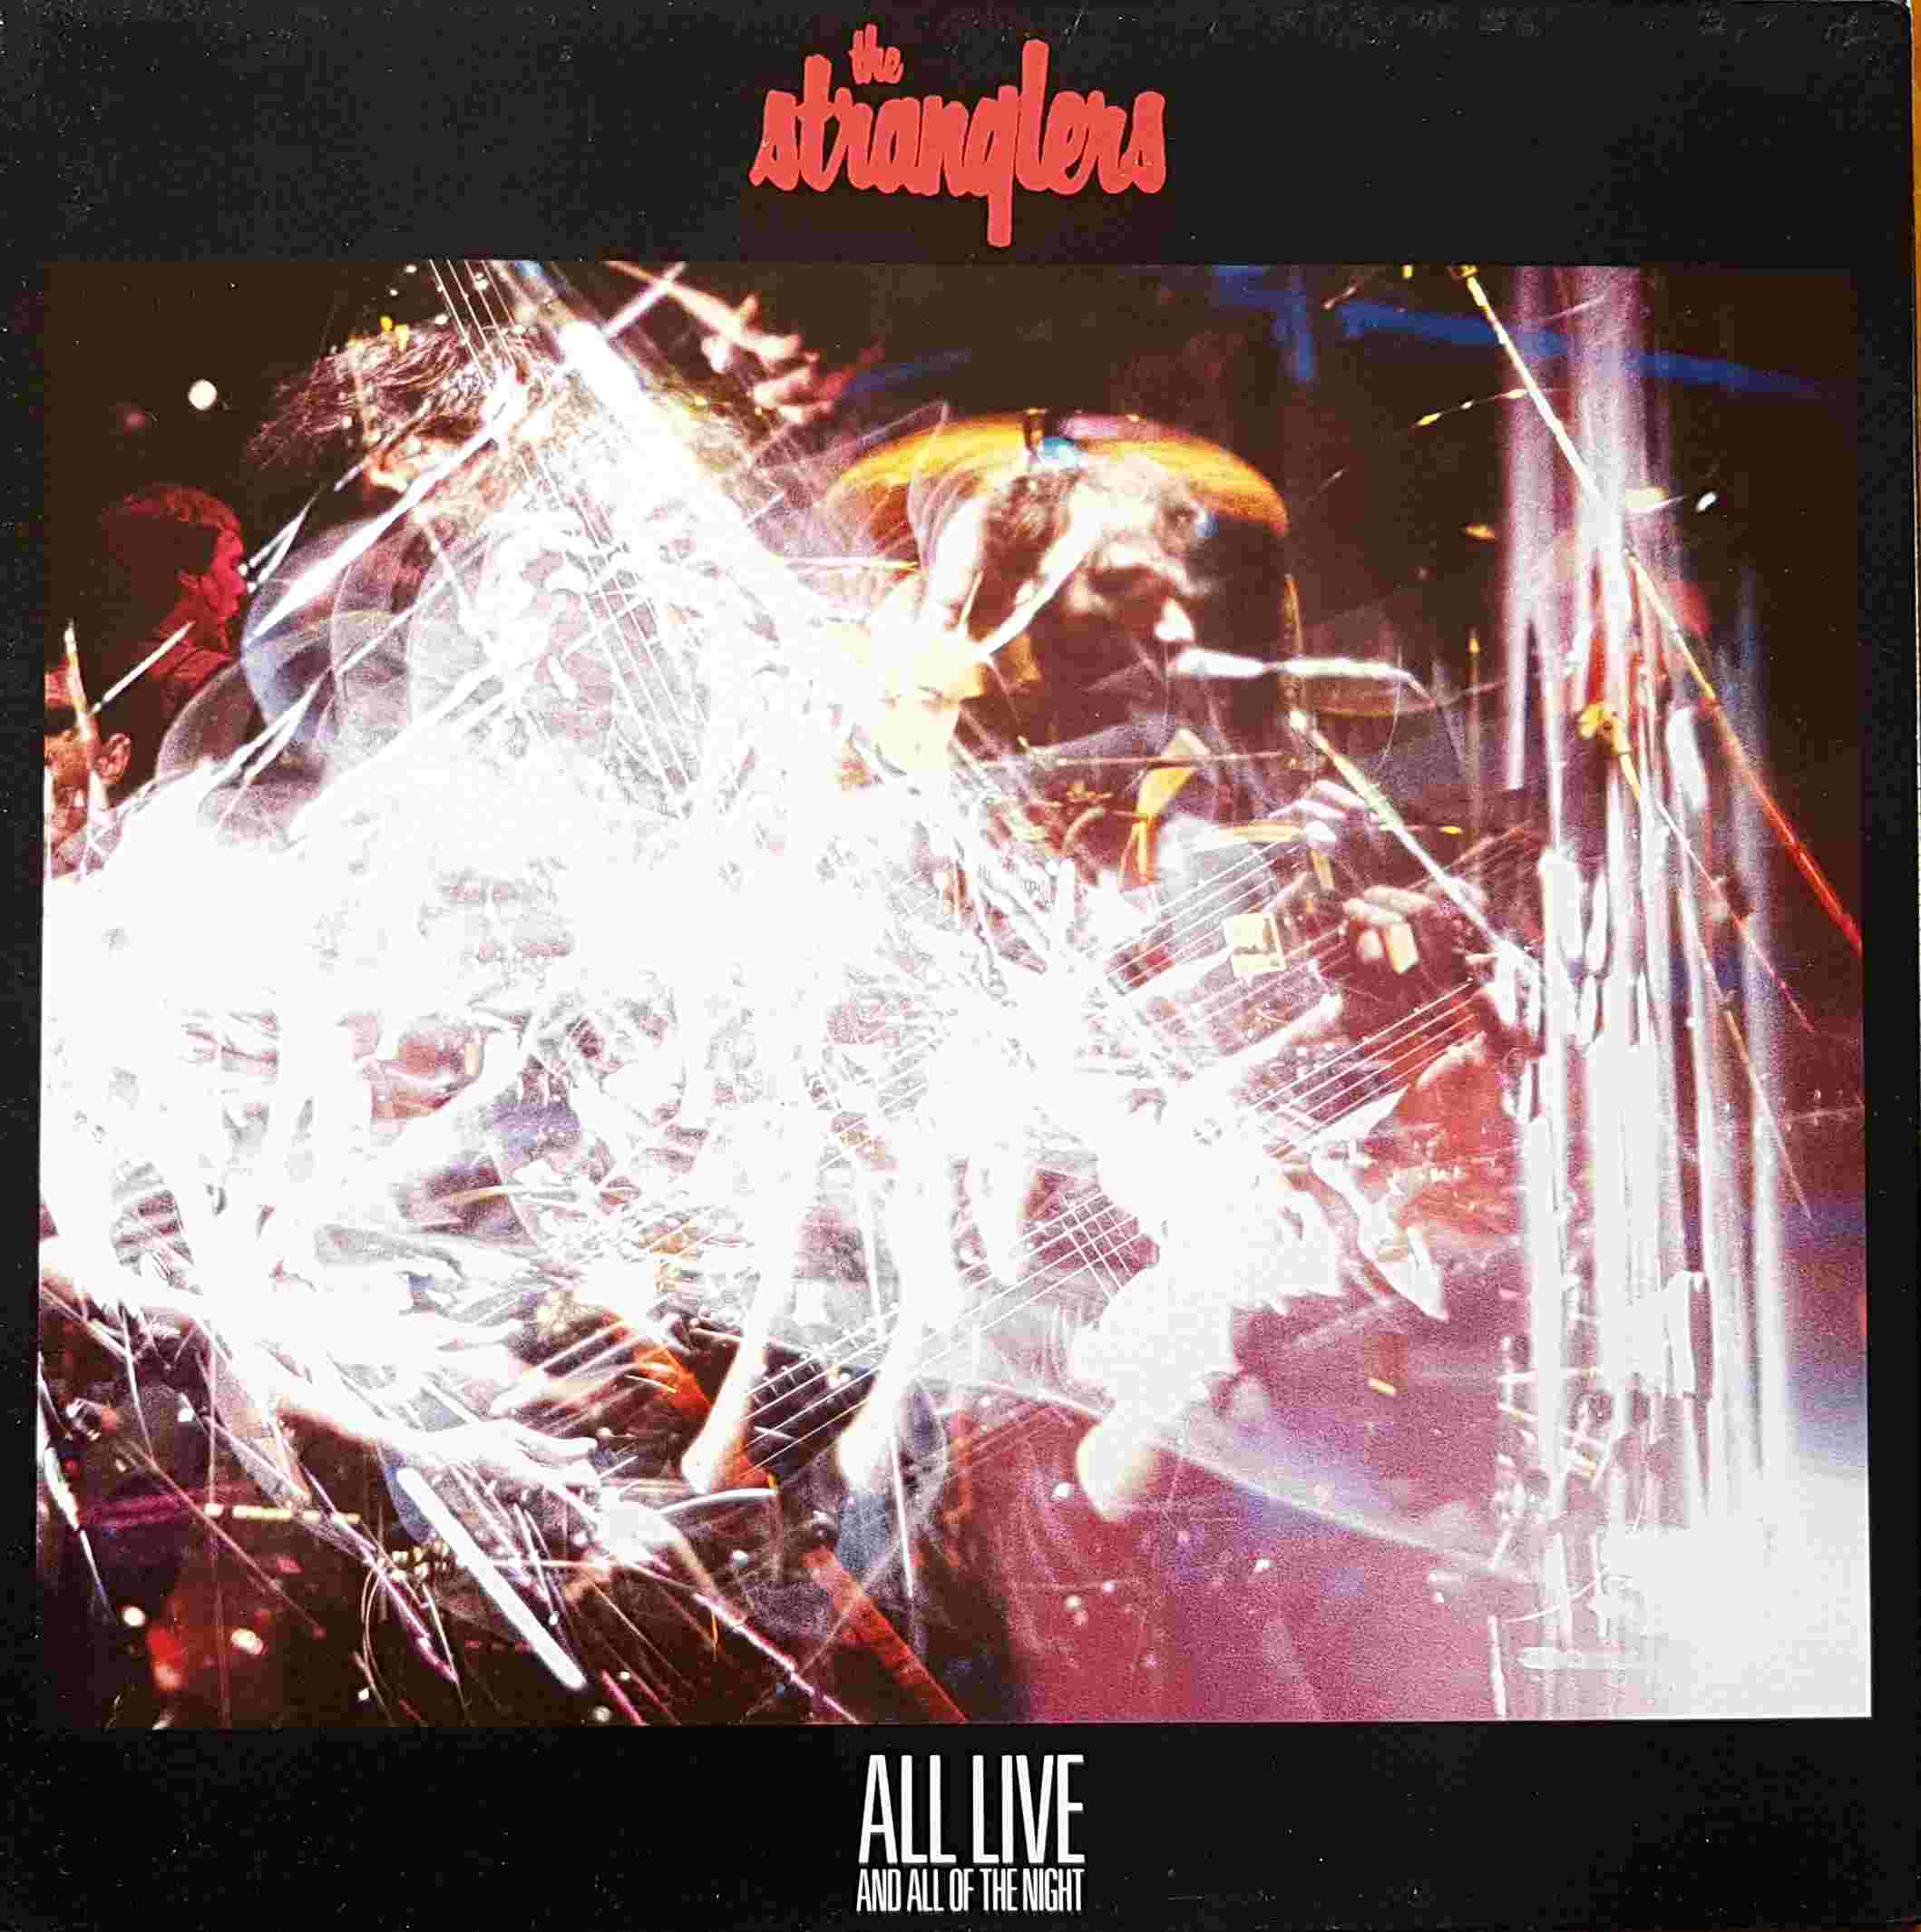 Picture of 460259 1 All live and all of the night by artist The Stranglers 